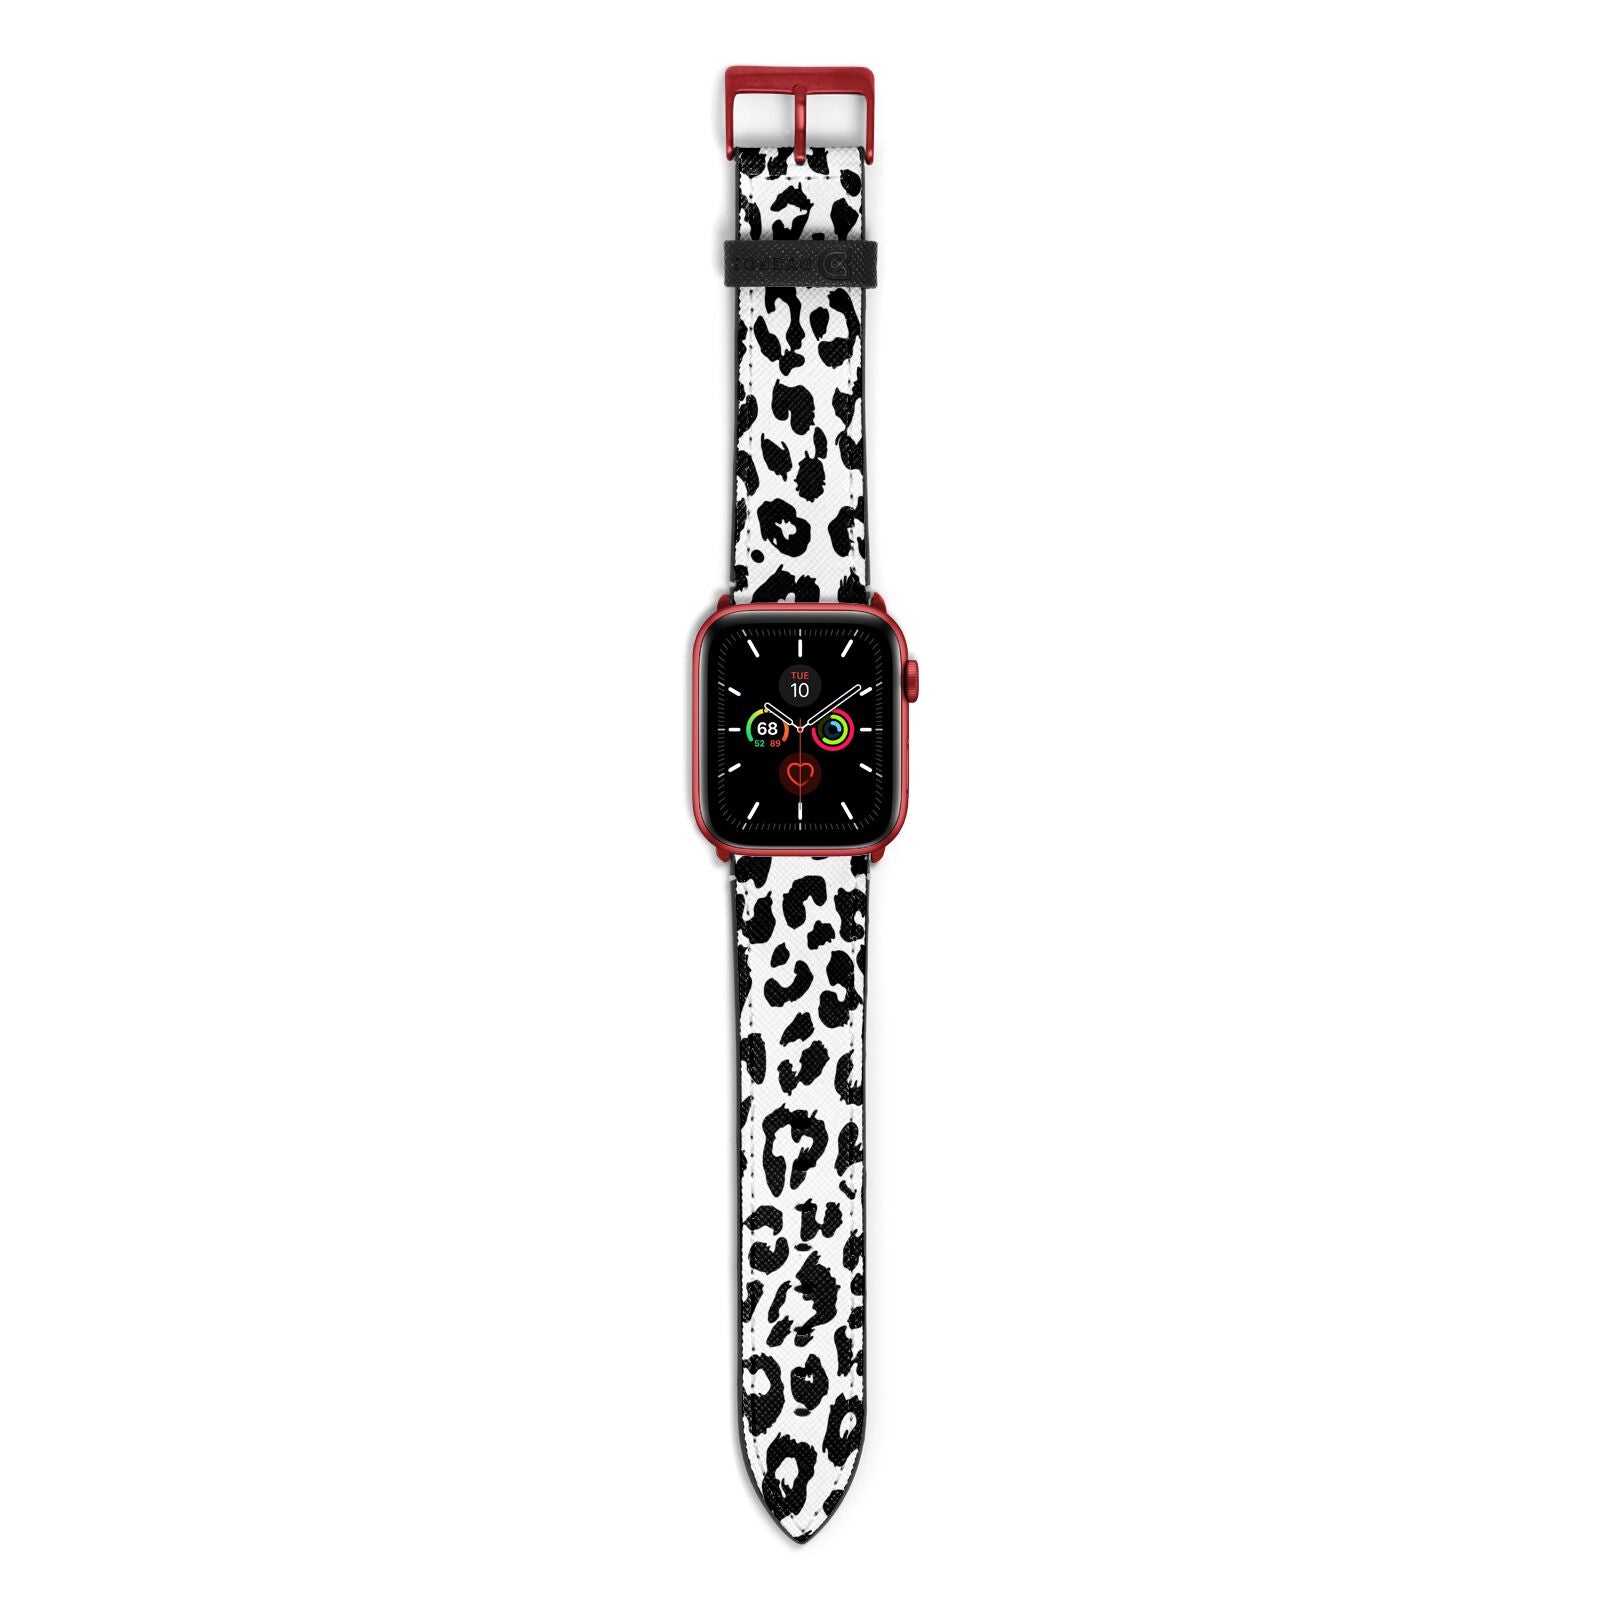 Black Leopard Print Apple Watch Strap with Red Hardware